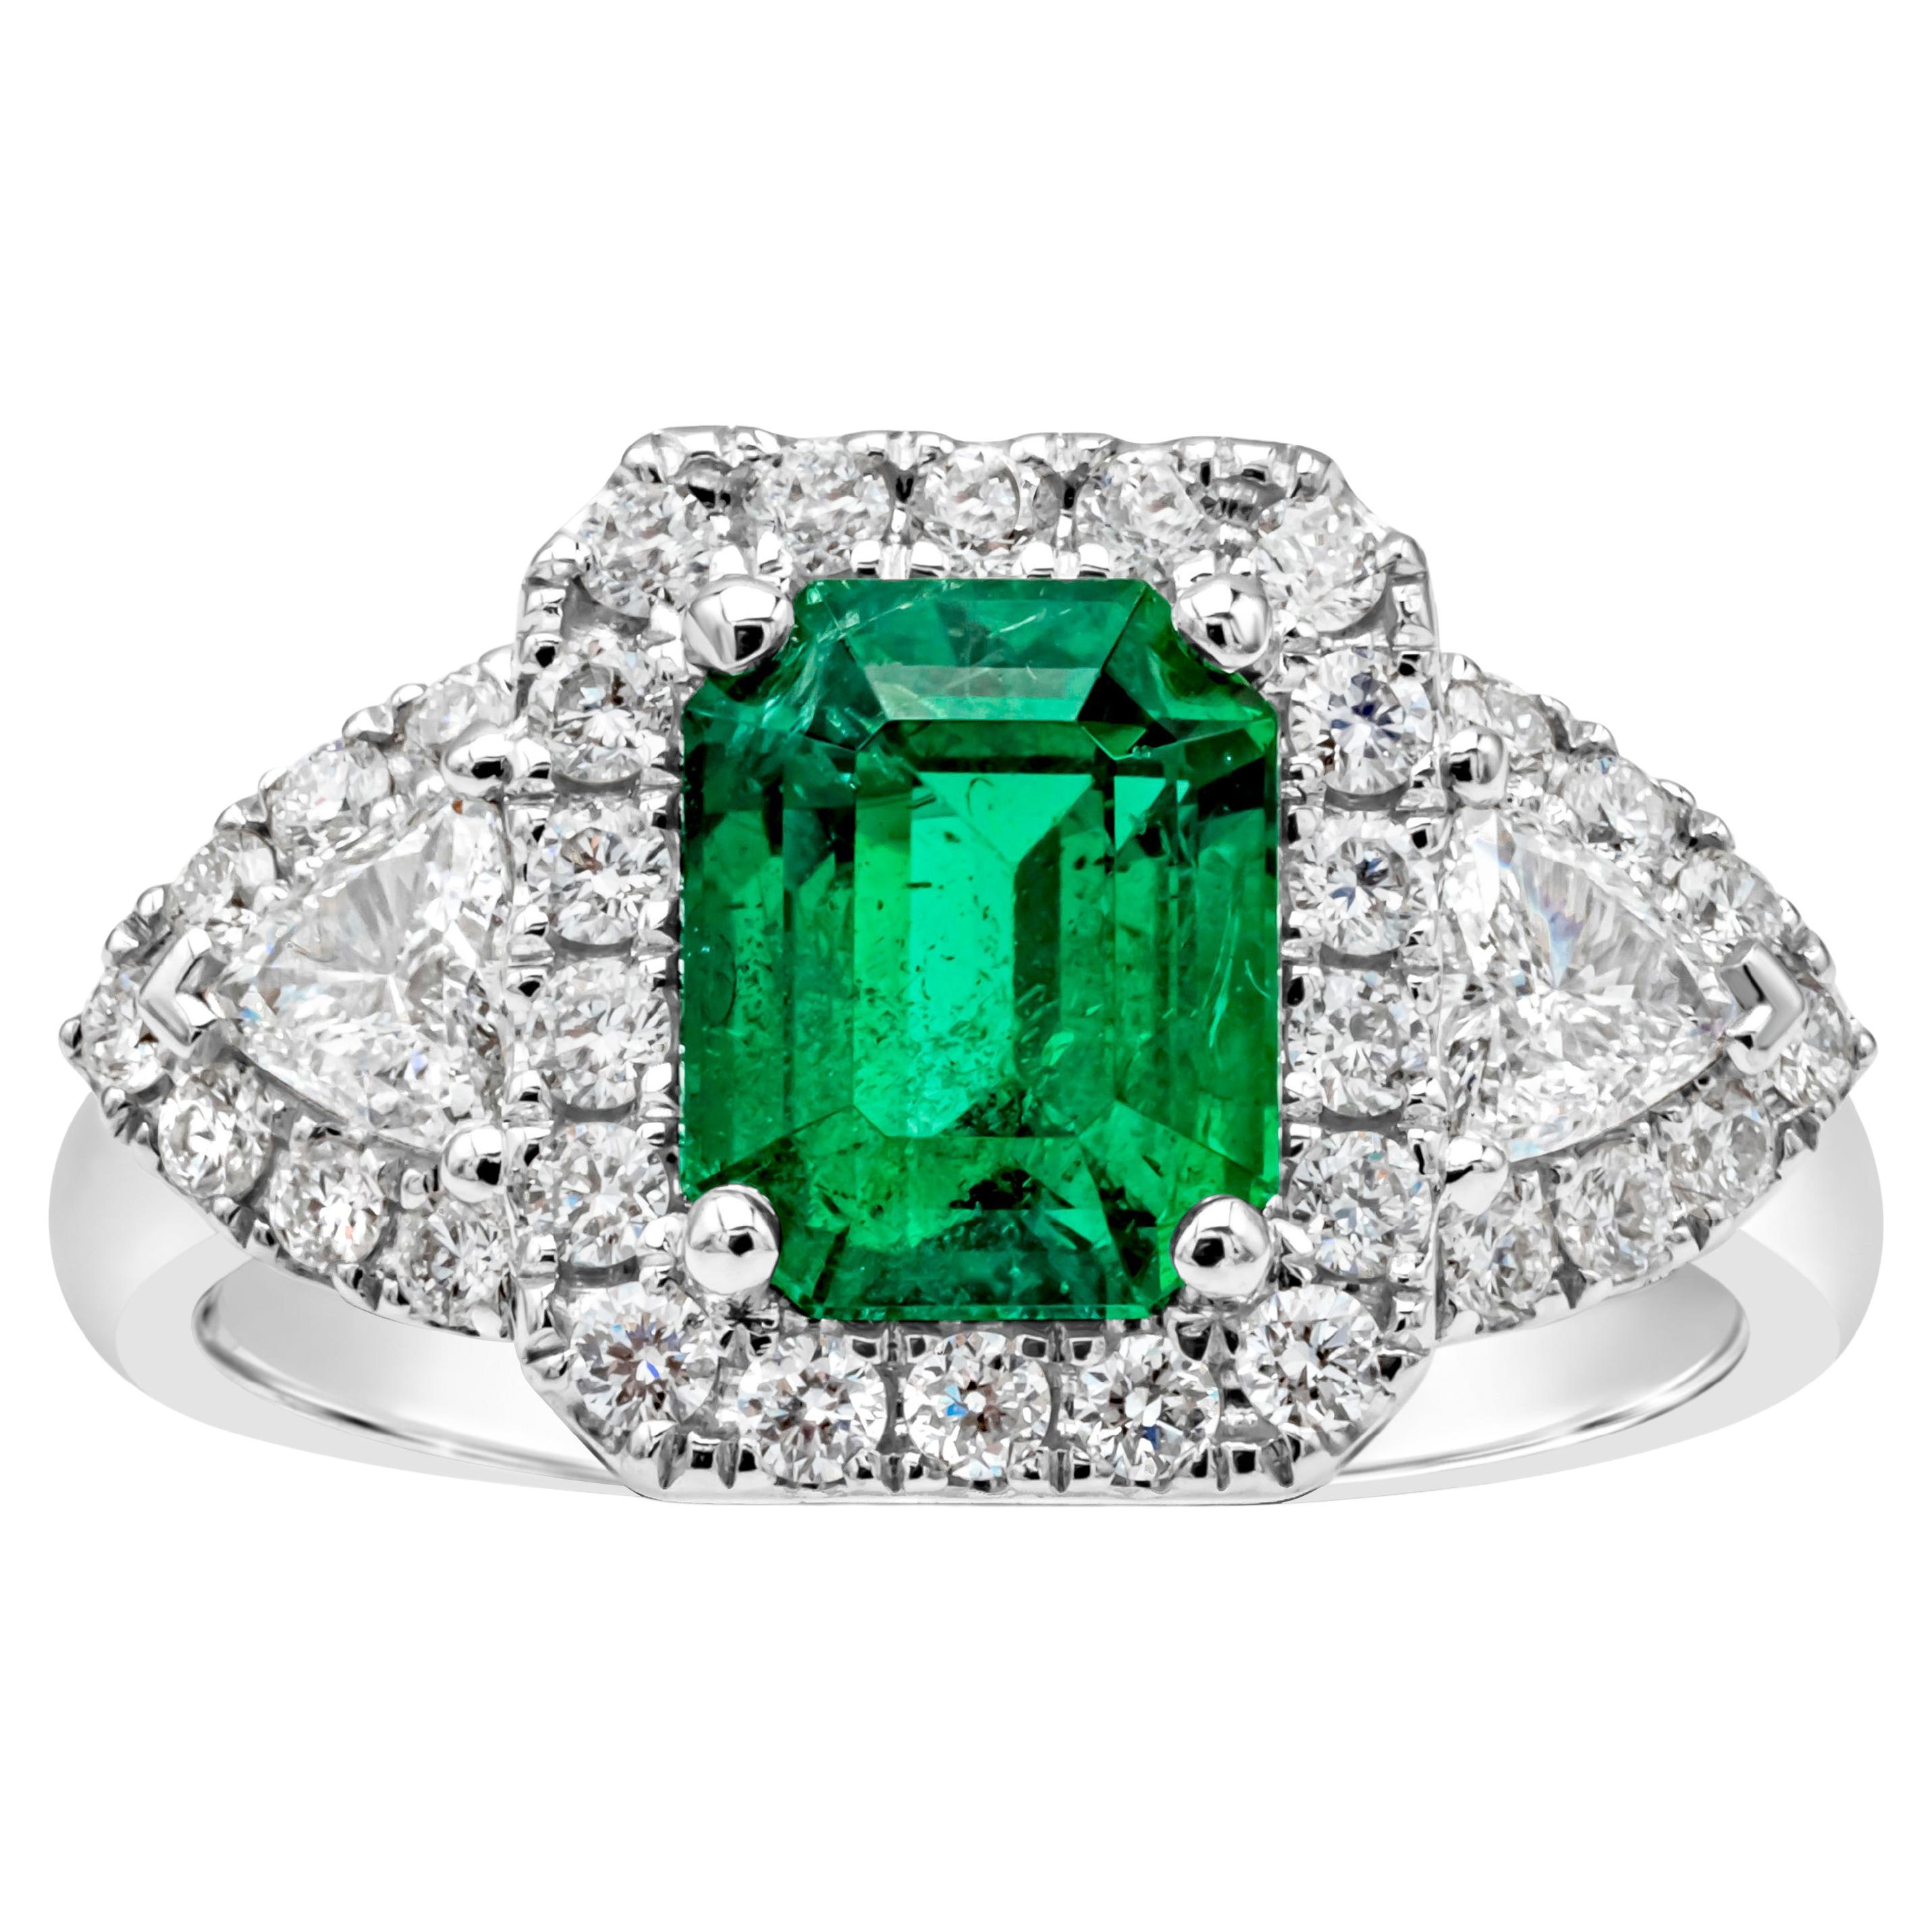 This stunning and beautiful three stone halo engagement ring features a GRS certified 1.90 carats emerald cut green emerald, set in a classic four prong setting. Flanked on each side are brilliant trillion cut diamonds weighing 0.29 carats total, F